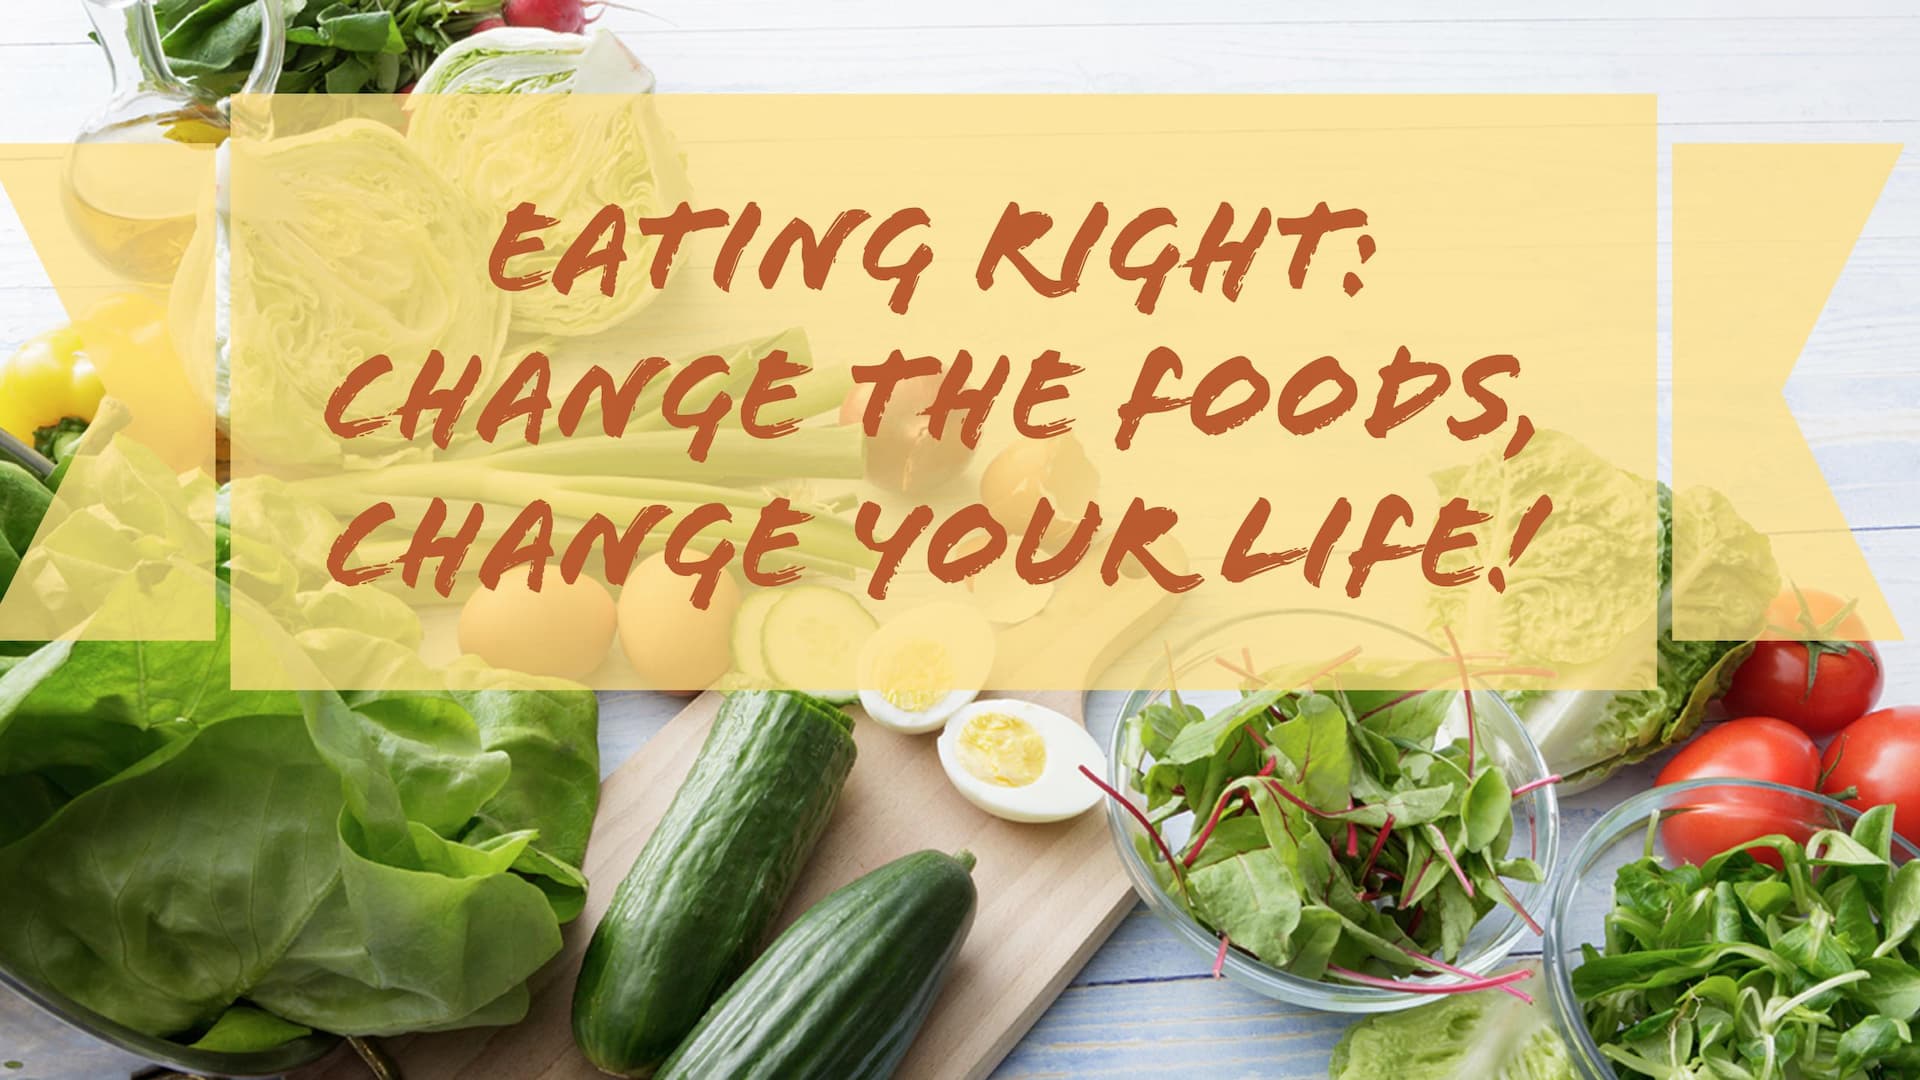 Eating Right: Change the Foods, Change Your Life!